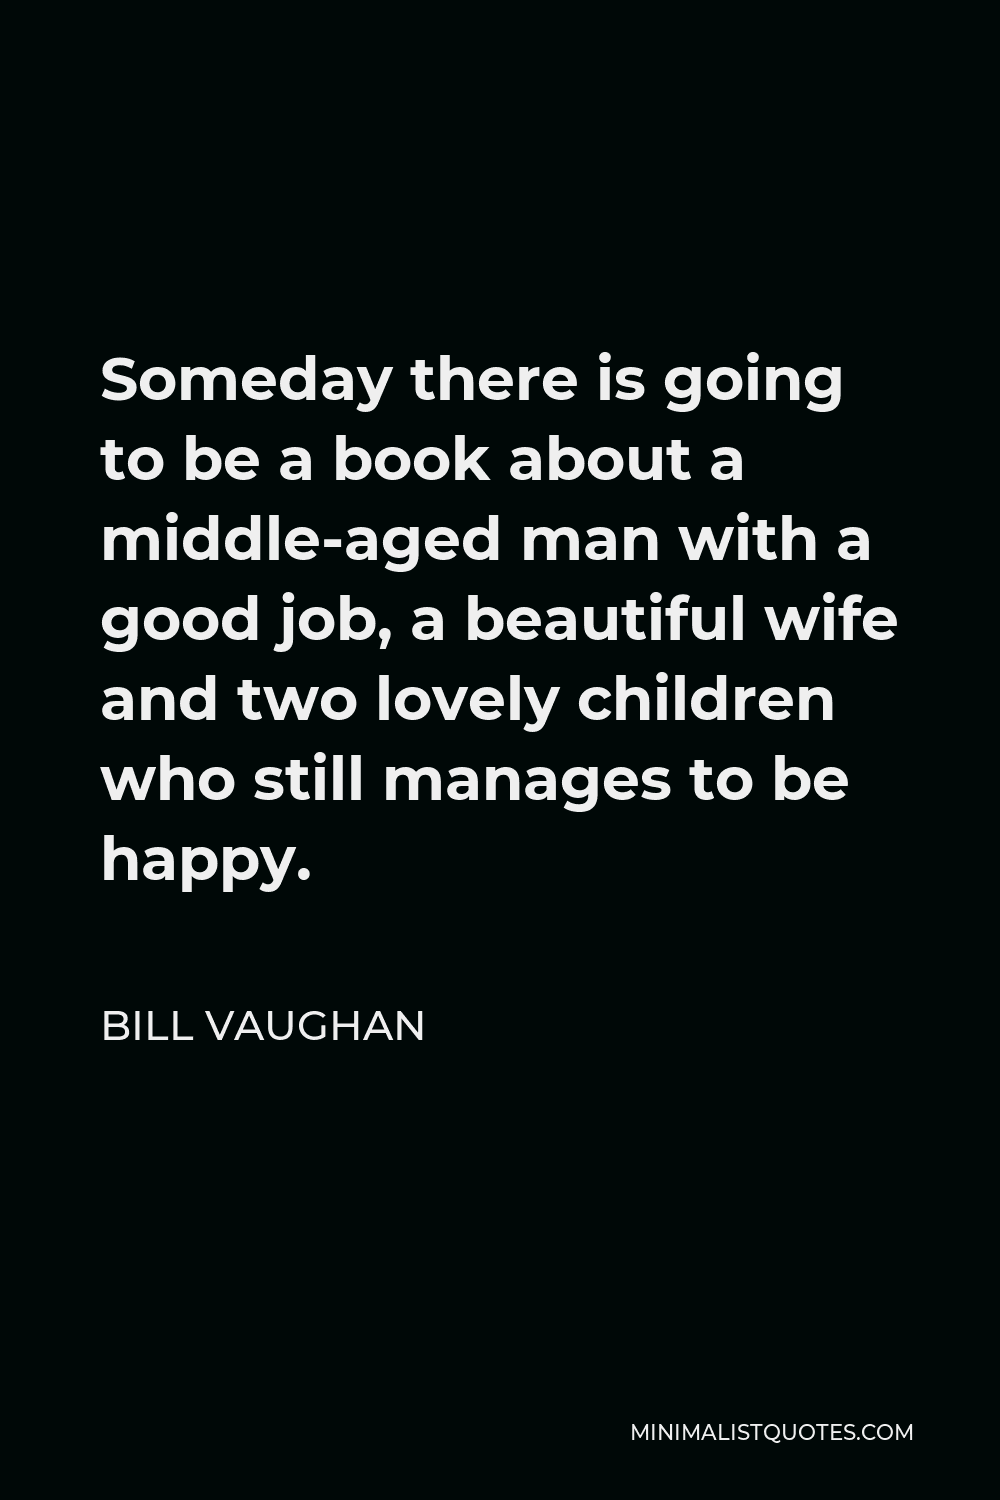 Bill Vaughan Quote - Someday there is going to be a book about a middle-aged man with a good job, a beautiful wife and two lovely children who still manages to be happy.